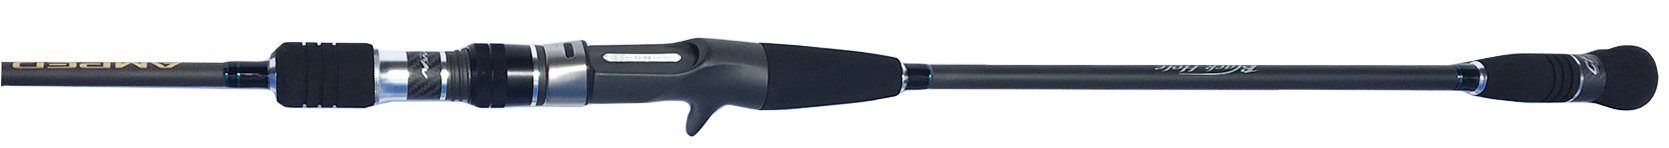 NS Amped Slow Jigging Graphite Rods